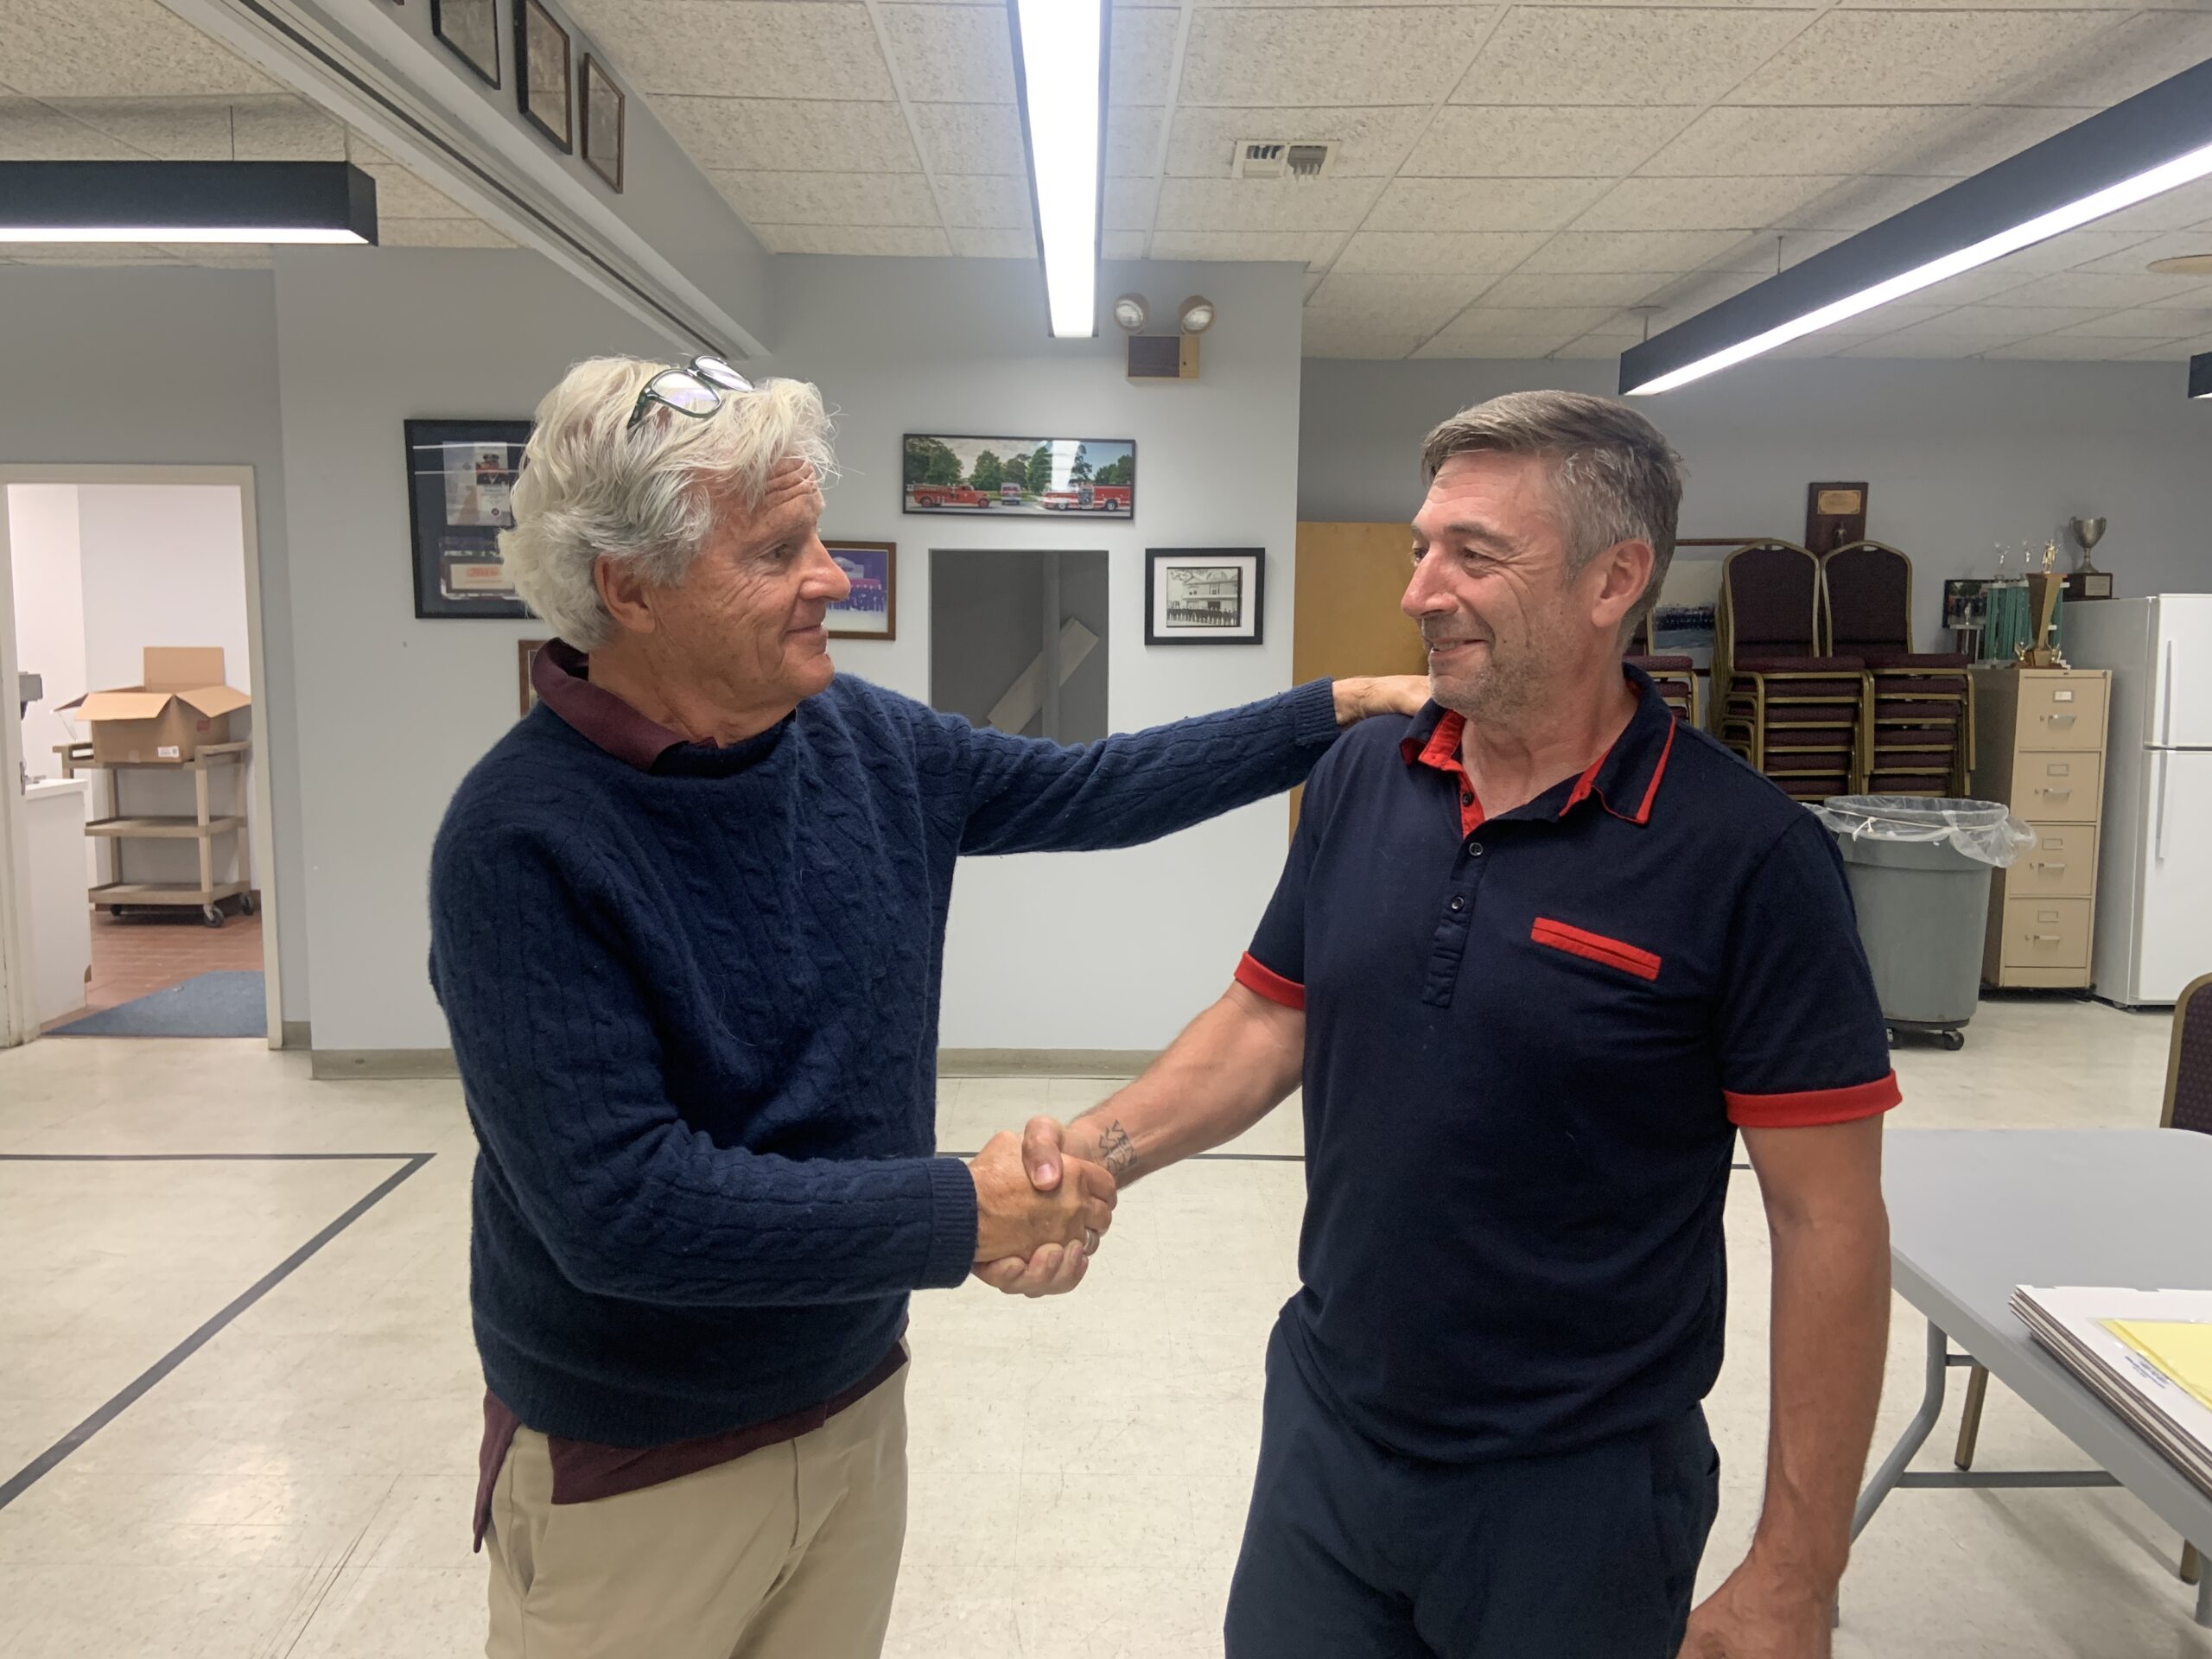 Mayor Jim Larocca congratulates Trustee Tom Gardella after Gardella was elected to a third term in light voting on Tuesday. Trustee Ed Haye, who was appointed to complete Larocca's term last year, was elected to his first full term as well. Both ran unopposed. STEPHEN J. KOTZ